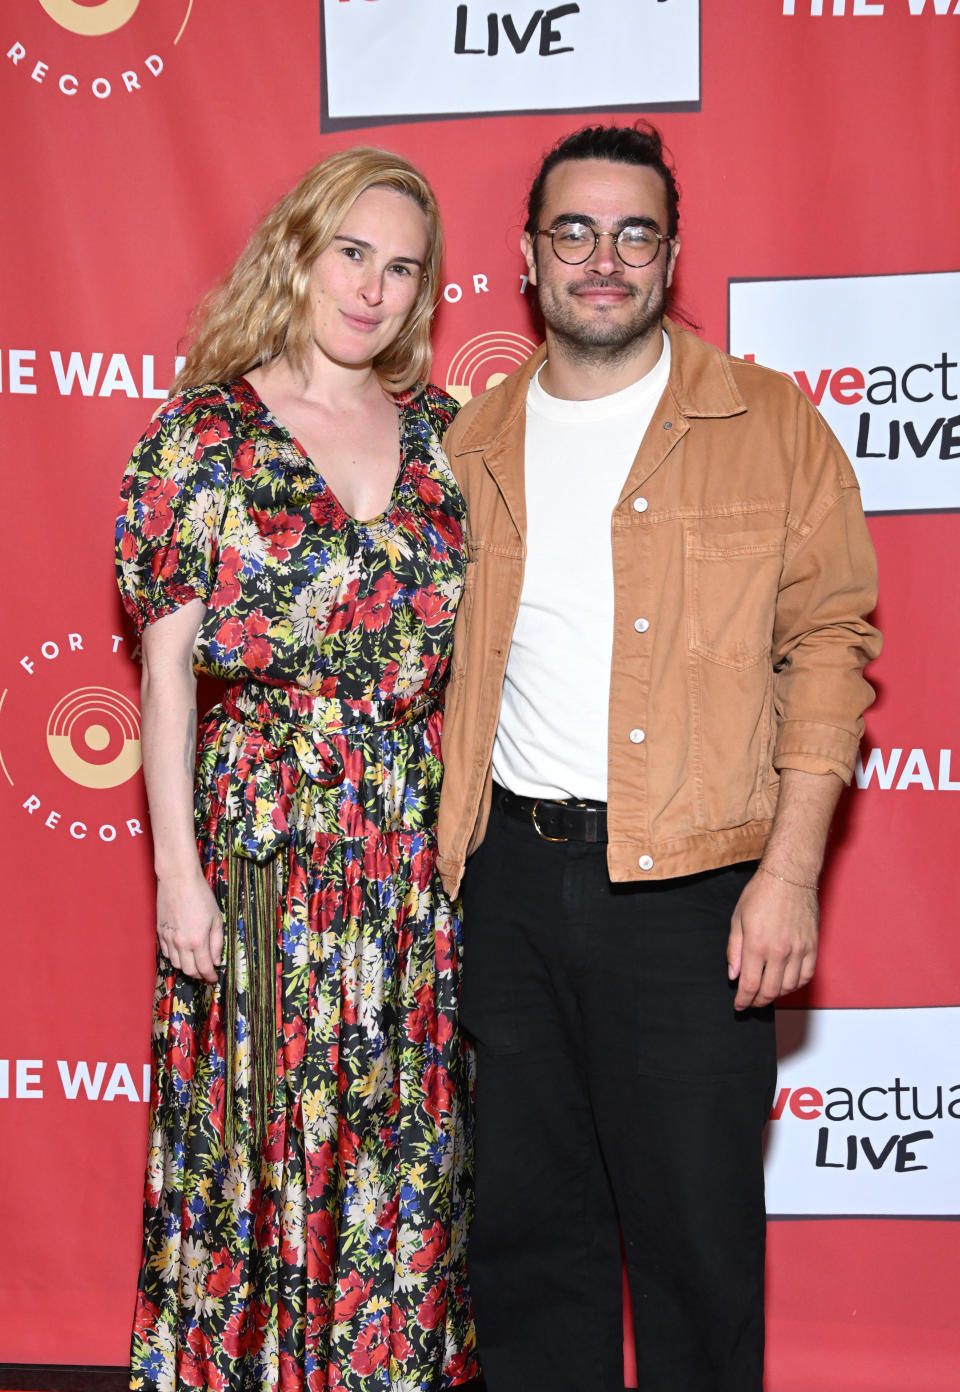 BEVERLY HILLS, CALIFORNIA - NOVEMBER 29: (L-R) Rumer Willis and Derek Thomas attend the Los Angeles premiere of "Love Actually Live" at Wallis Annenberg Center for the Performing Arts on November 29, 2023 in Beverly Hills, California. (Photo by Michael Tullberg/Getty Images)